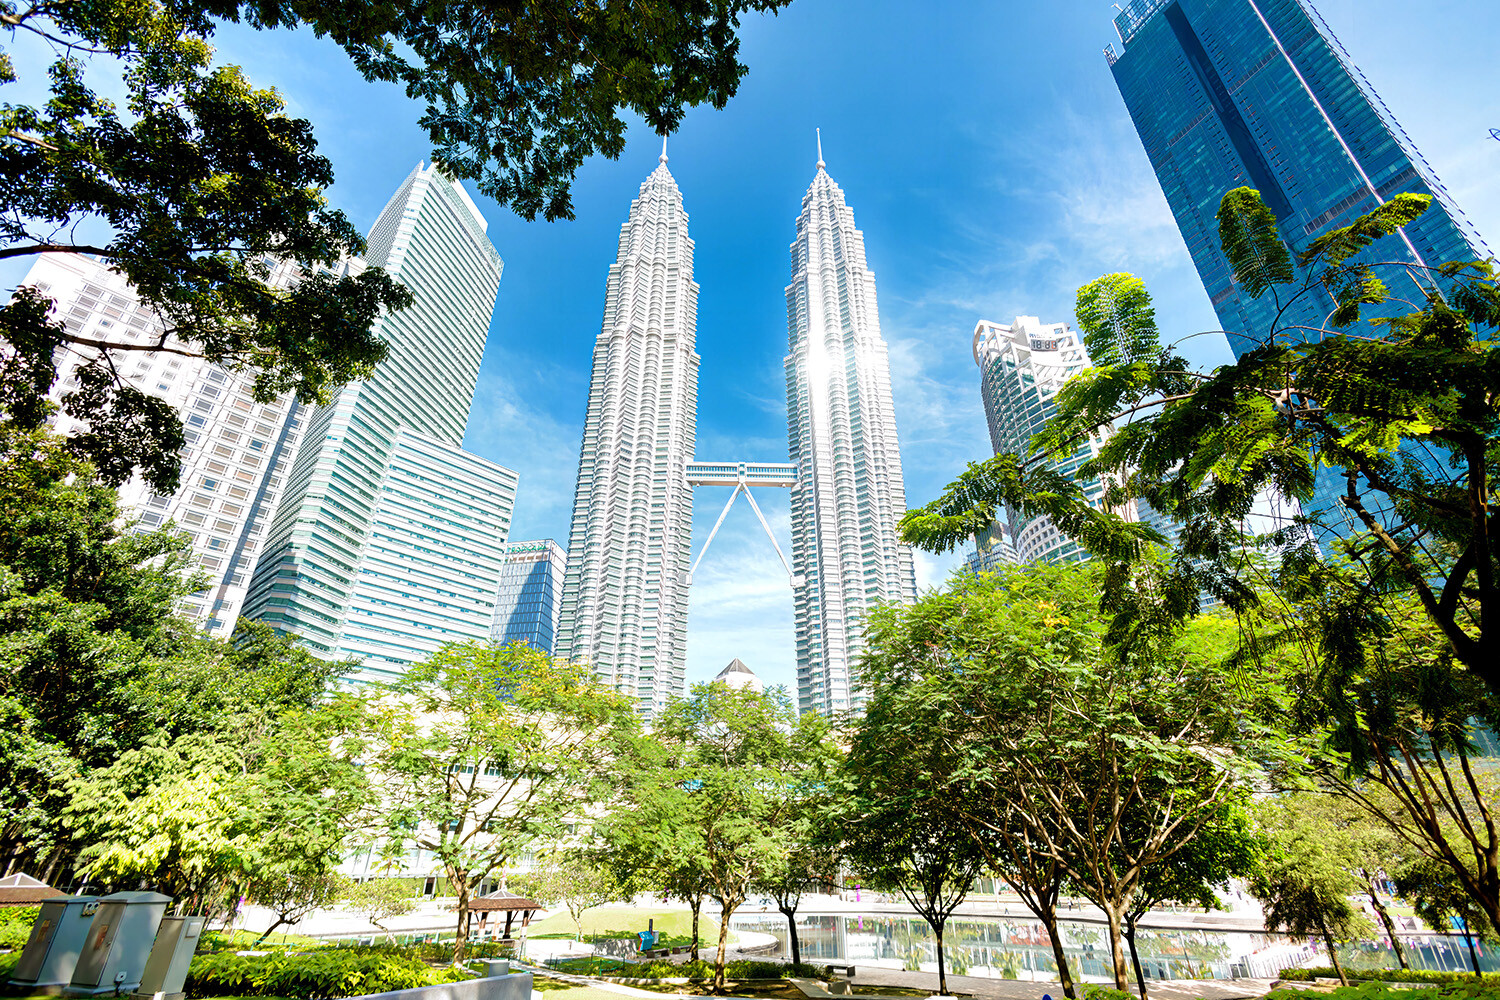 Petronas Twin Towers, one of Malaysia's tourist attractions